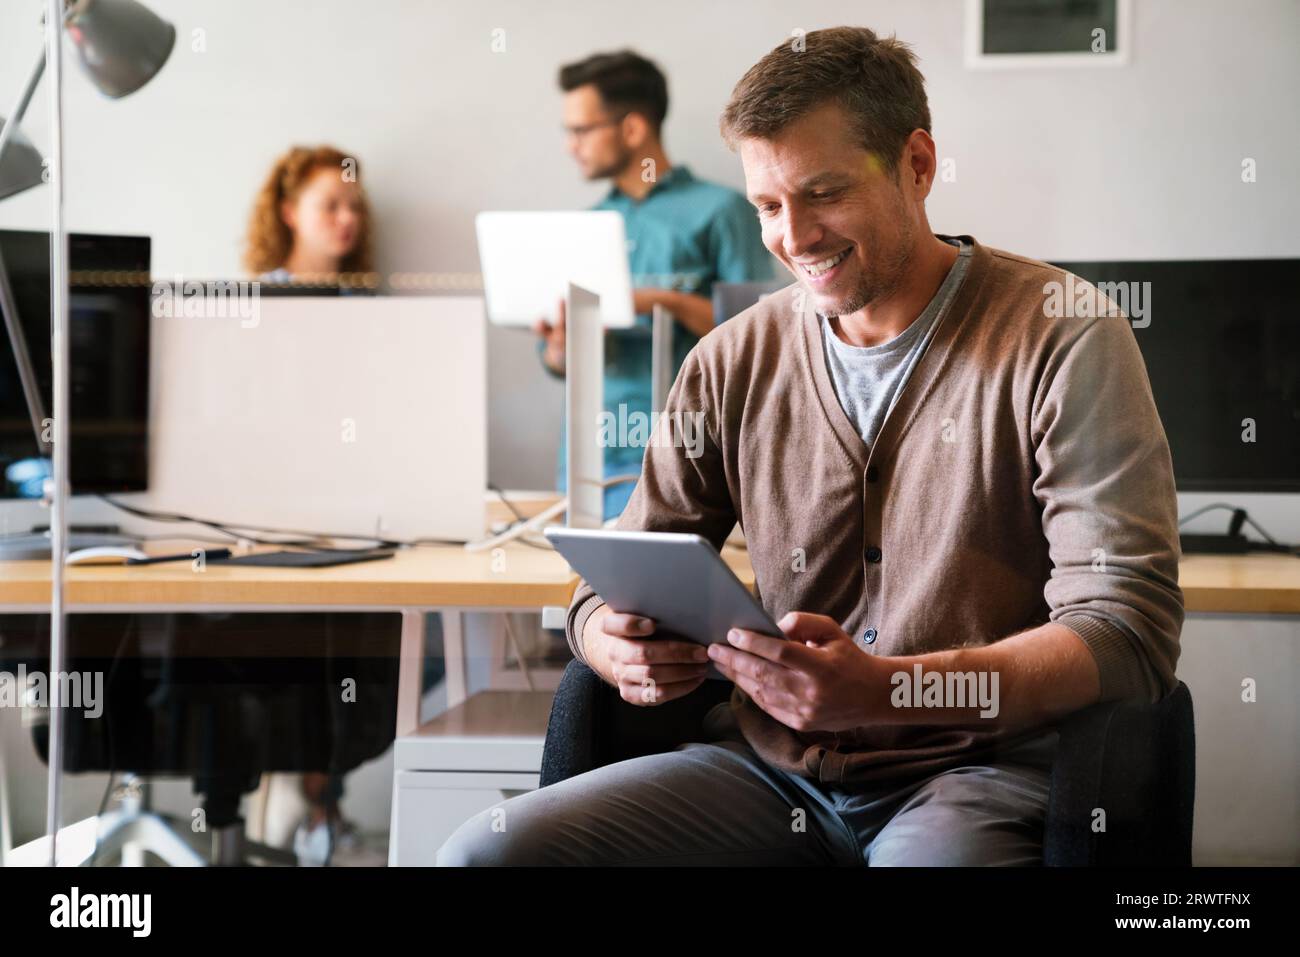 Confident and successful. Confident young man in startup business office holding digital tablet Stock Photo